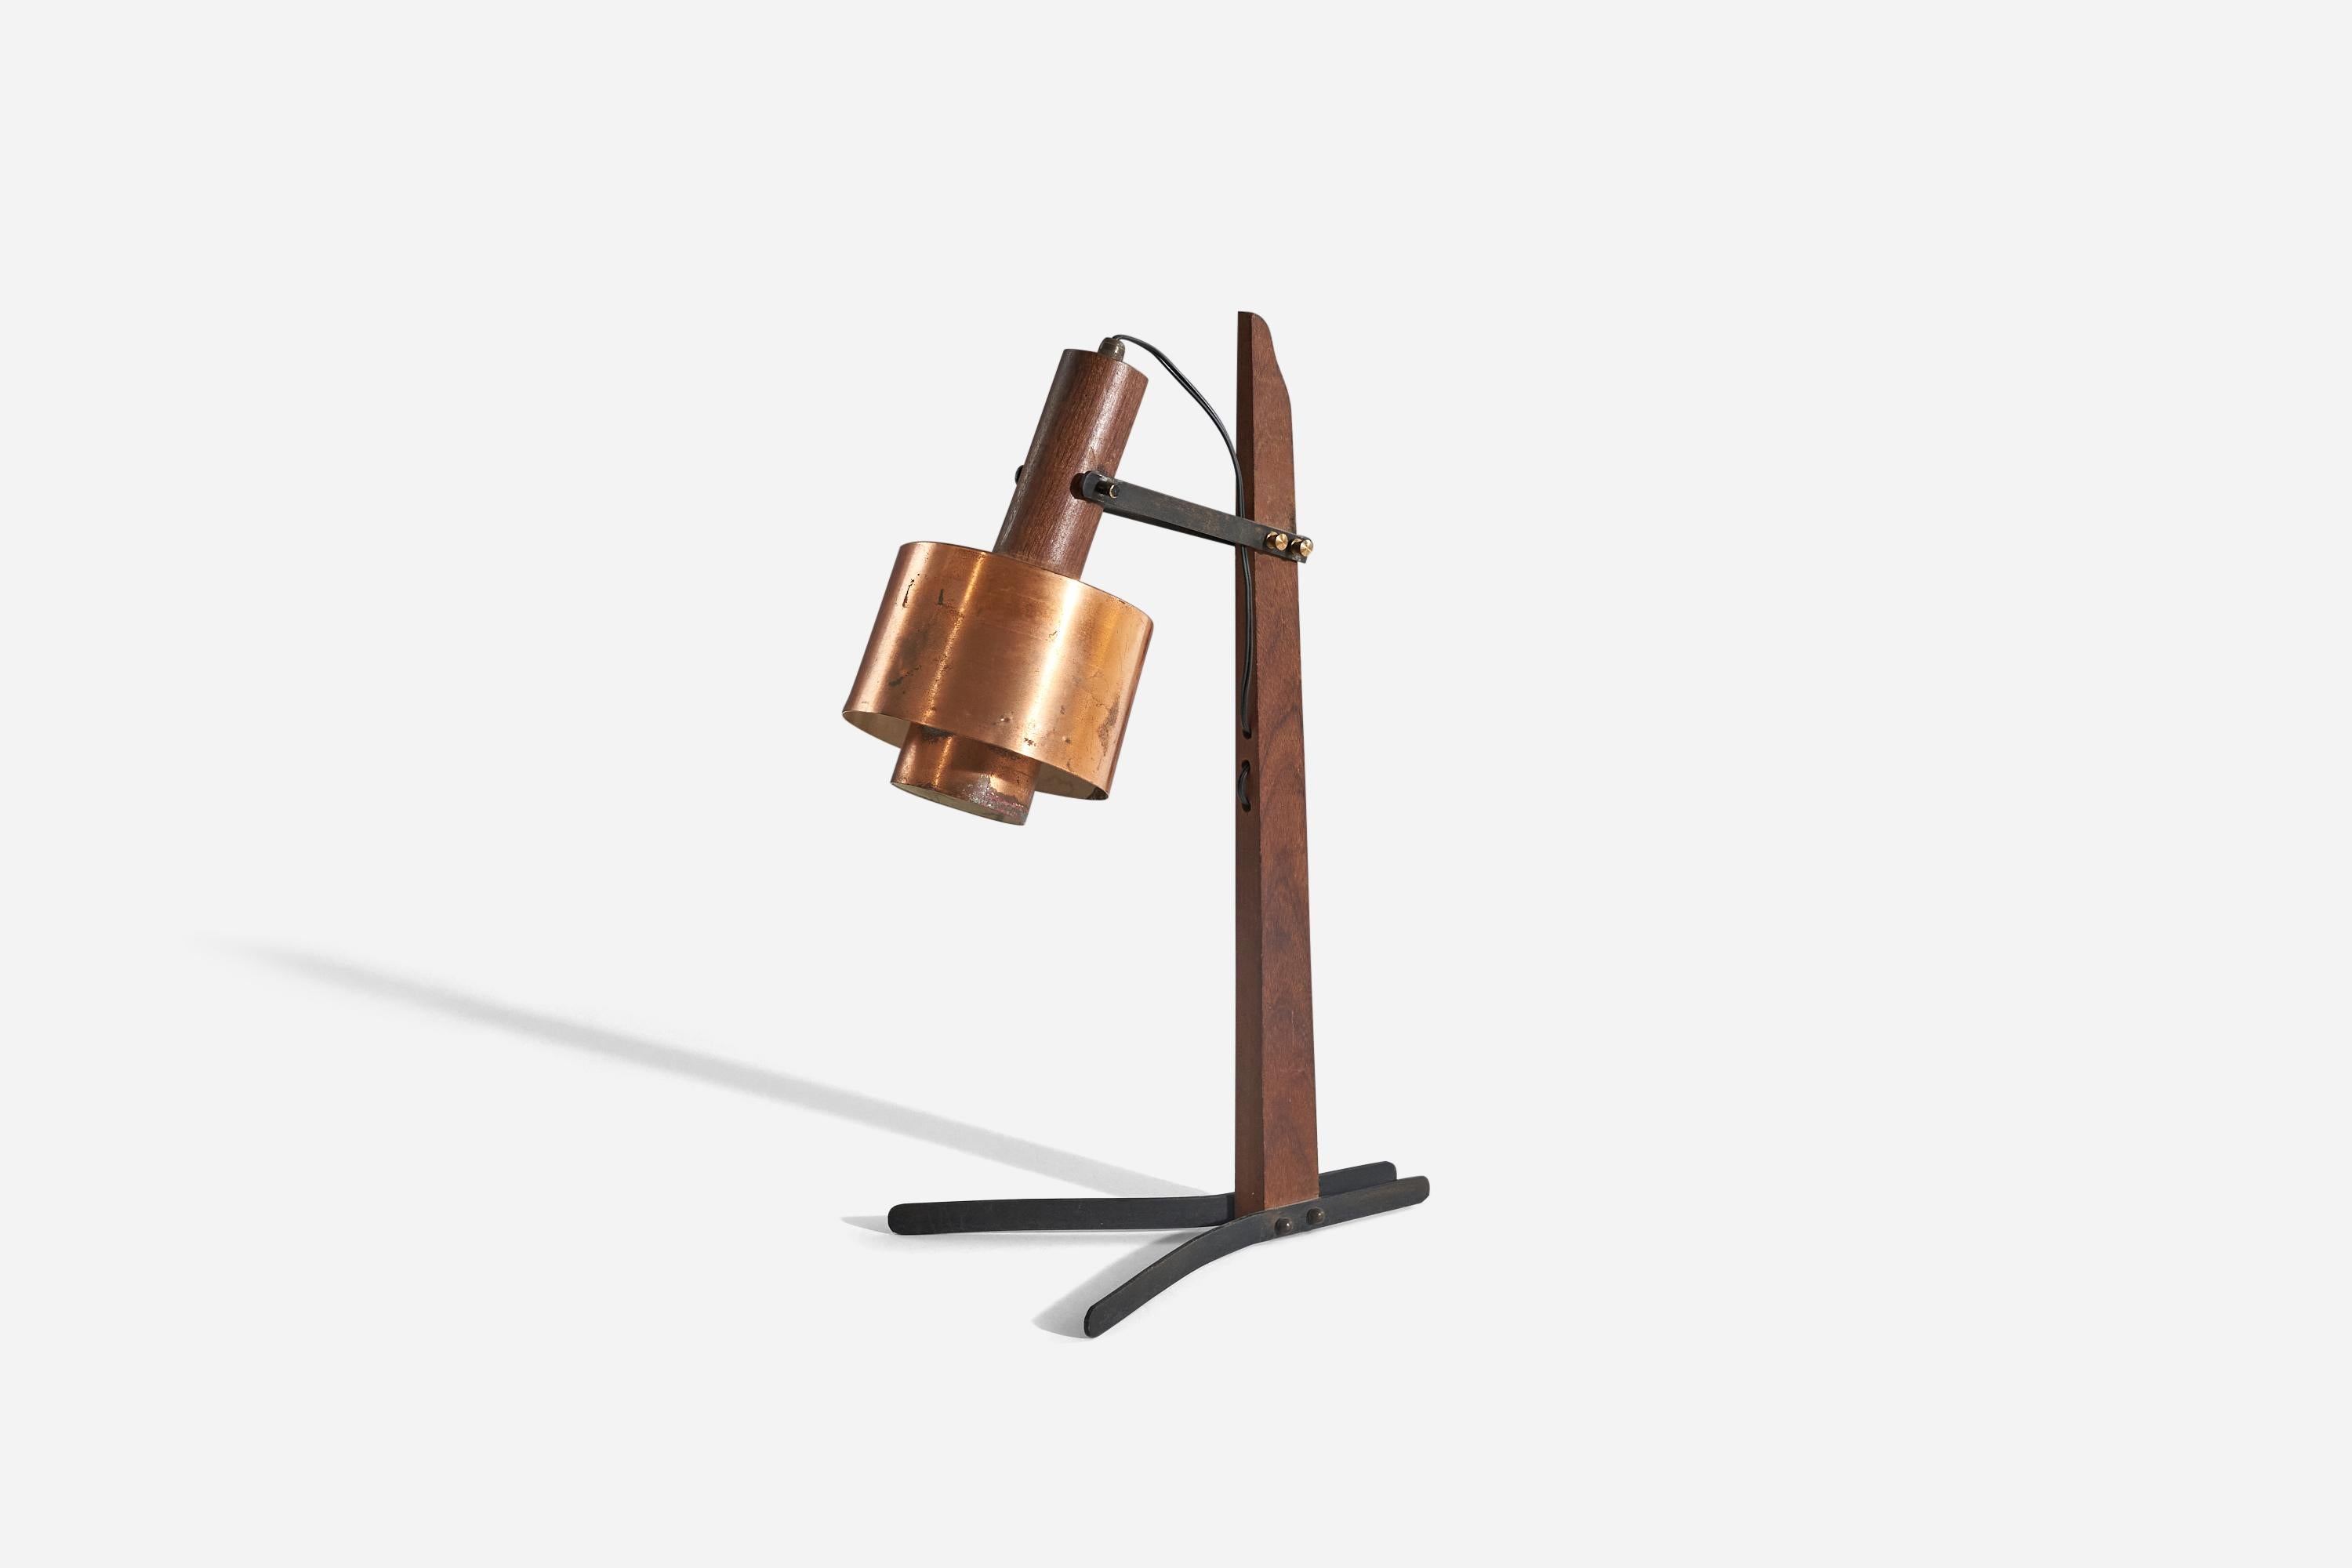 A teak, metal and copper table lamp designed and produced by an Italian designer, Italy, 1950s.

Variable dimensions, measured as illustrated in the first image.